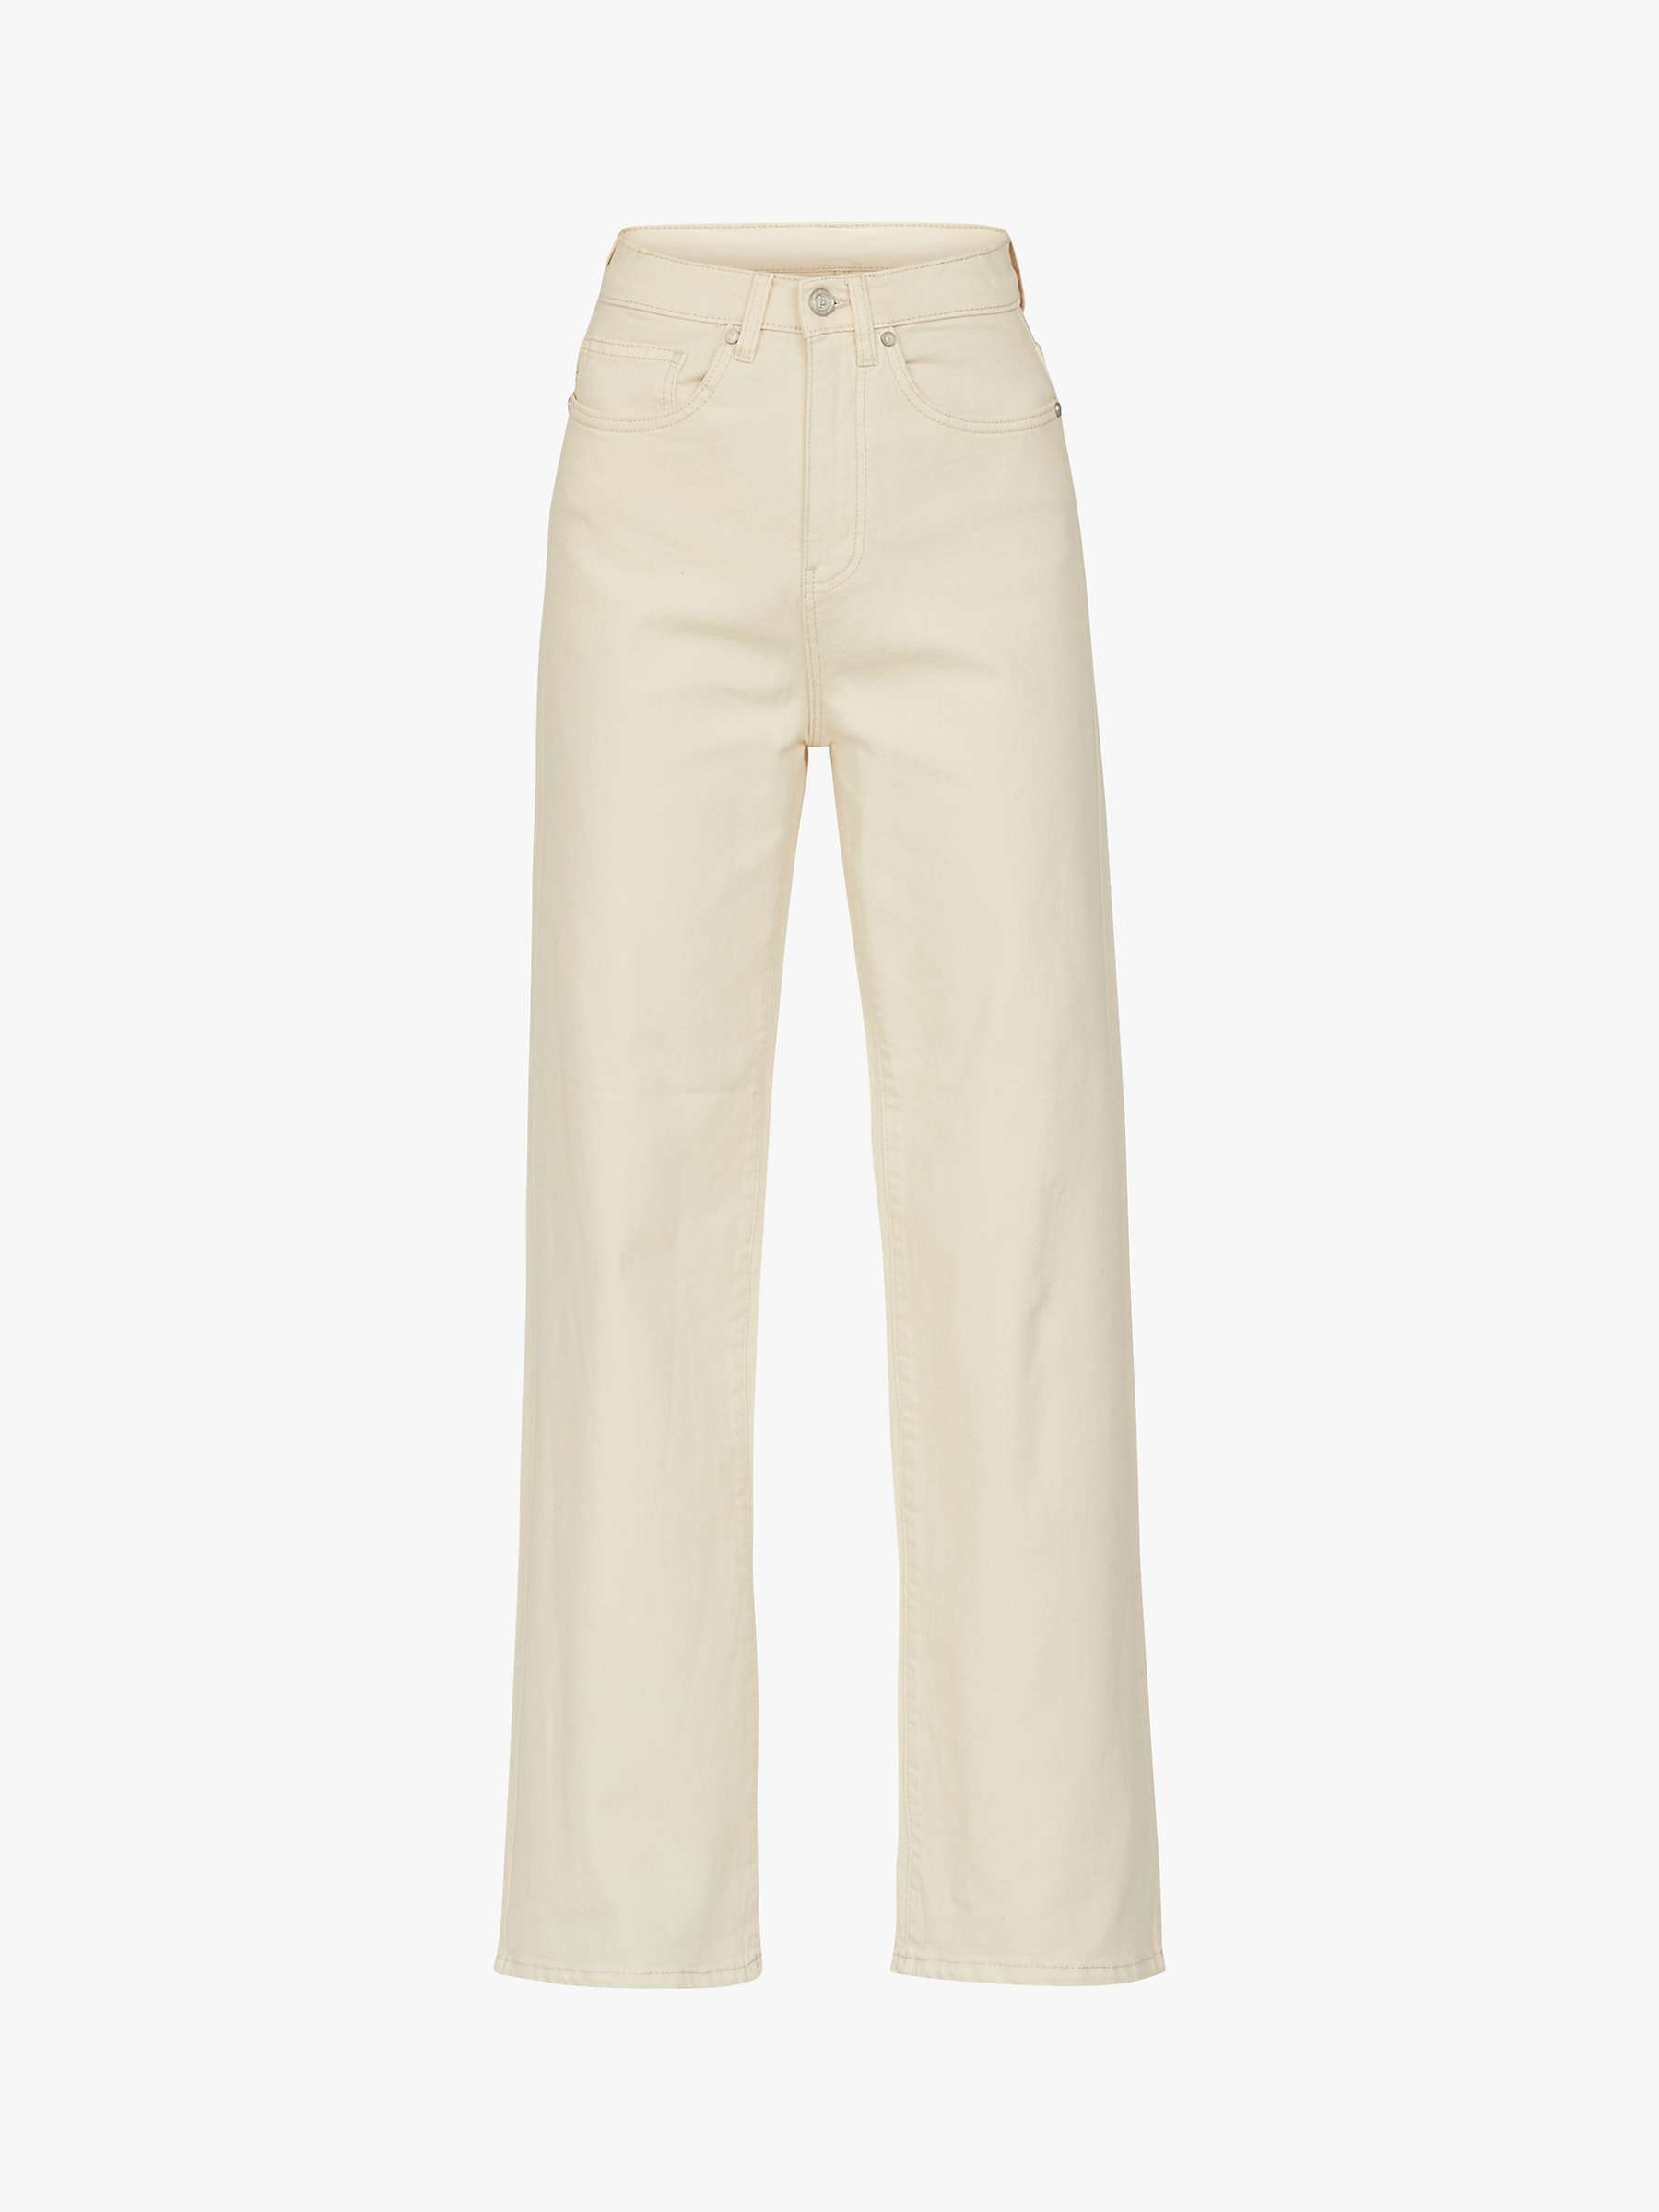 Buy Sisters Point Owi Wide Leg Jeans, Porcelain Online at johnlewis.com